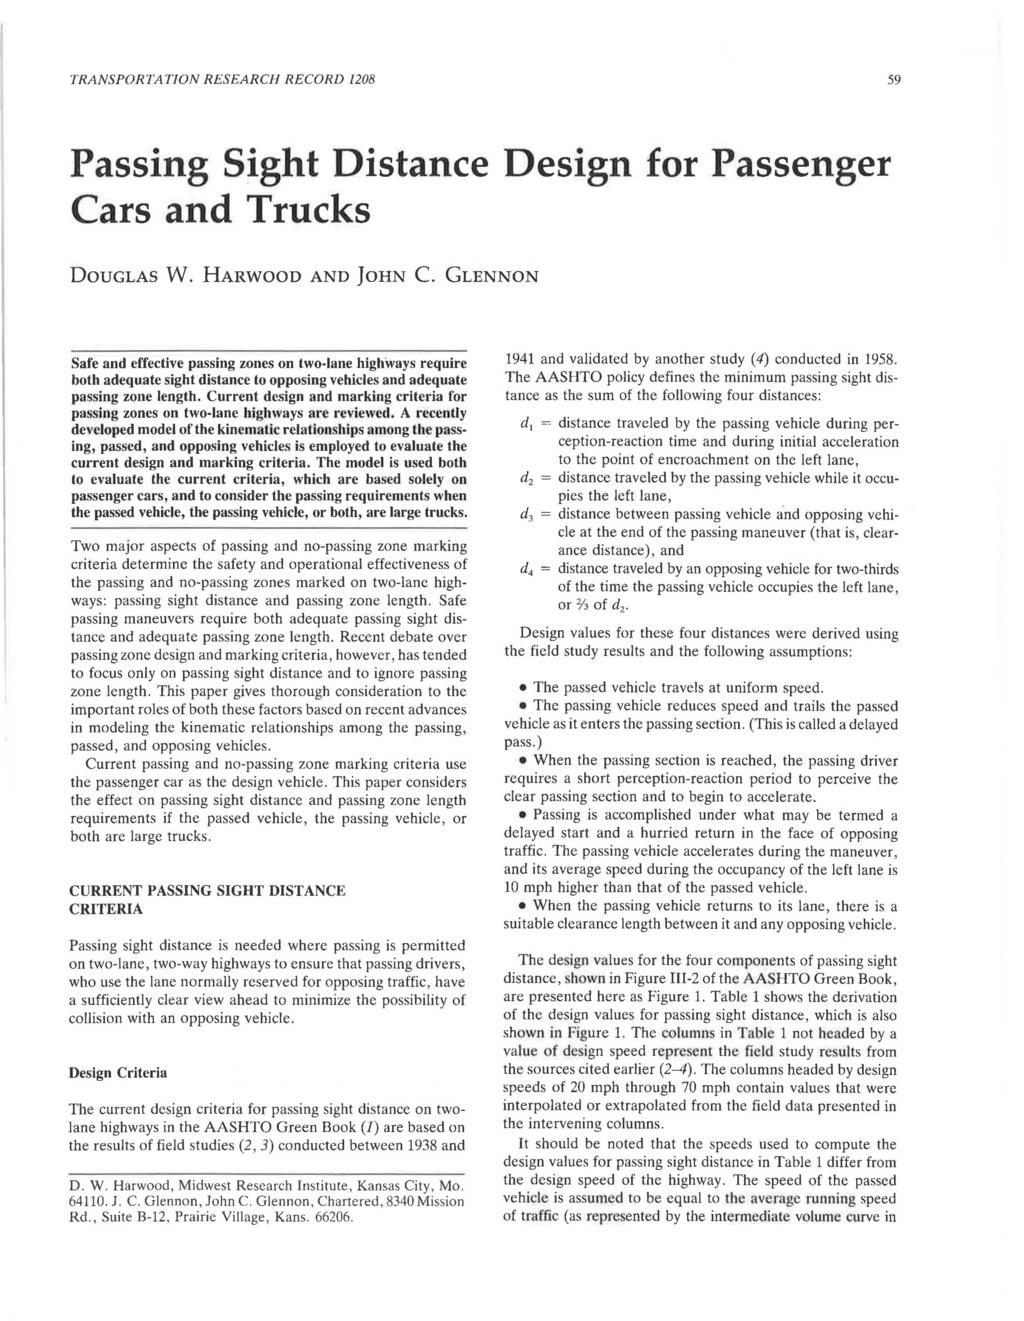 TRANSPORTATION RESEARCH RECORD 59 Passing Sight Distance Design for Passenger Cars and Trucks DOUGLAS W. HARWOOD AND JoHN C.